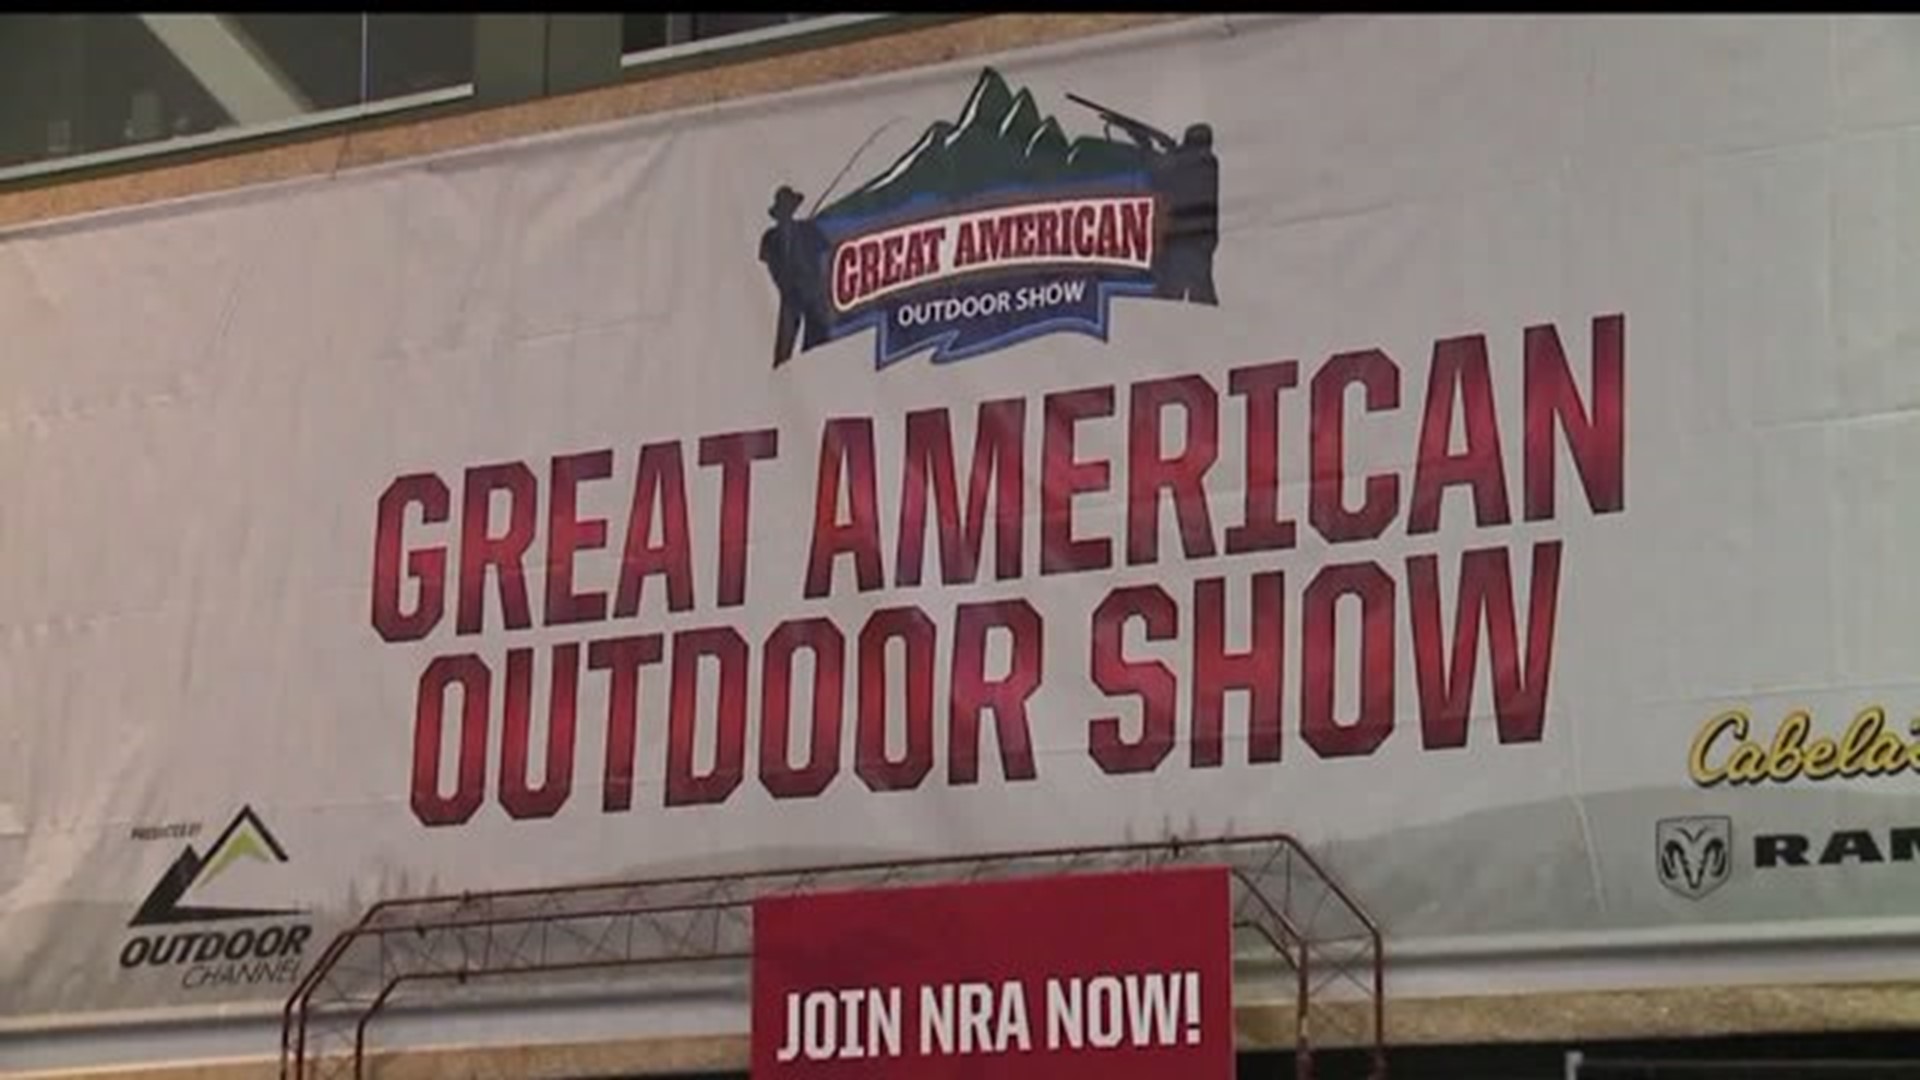 Opening day for the Great American Outdoor Show